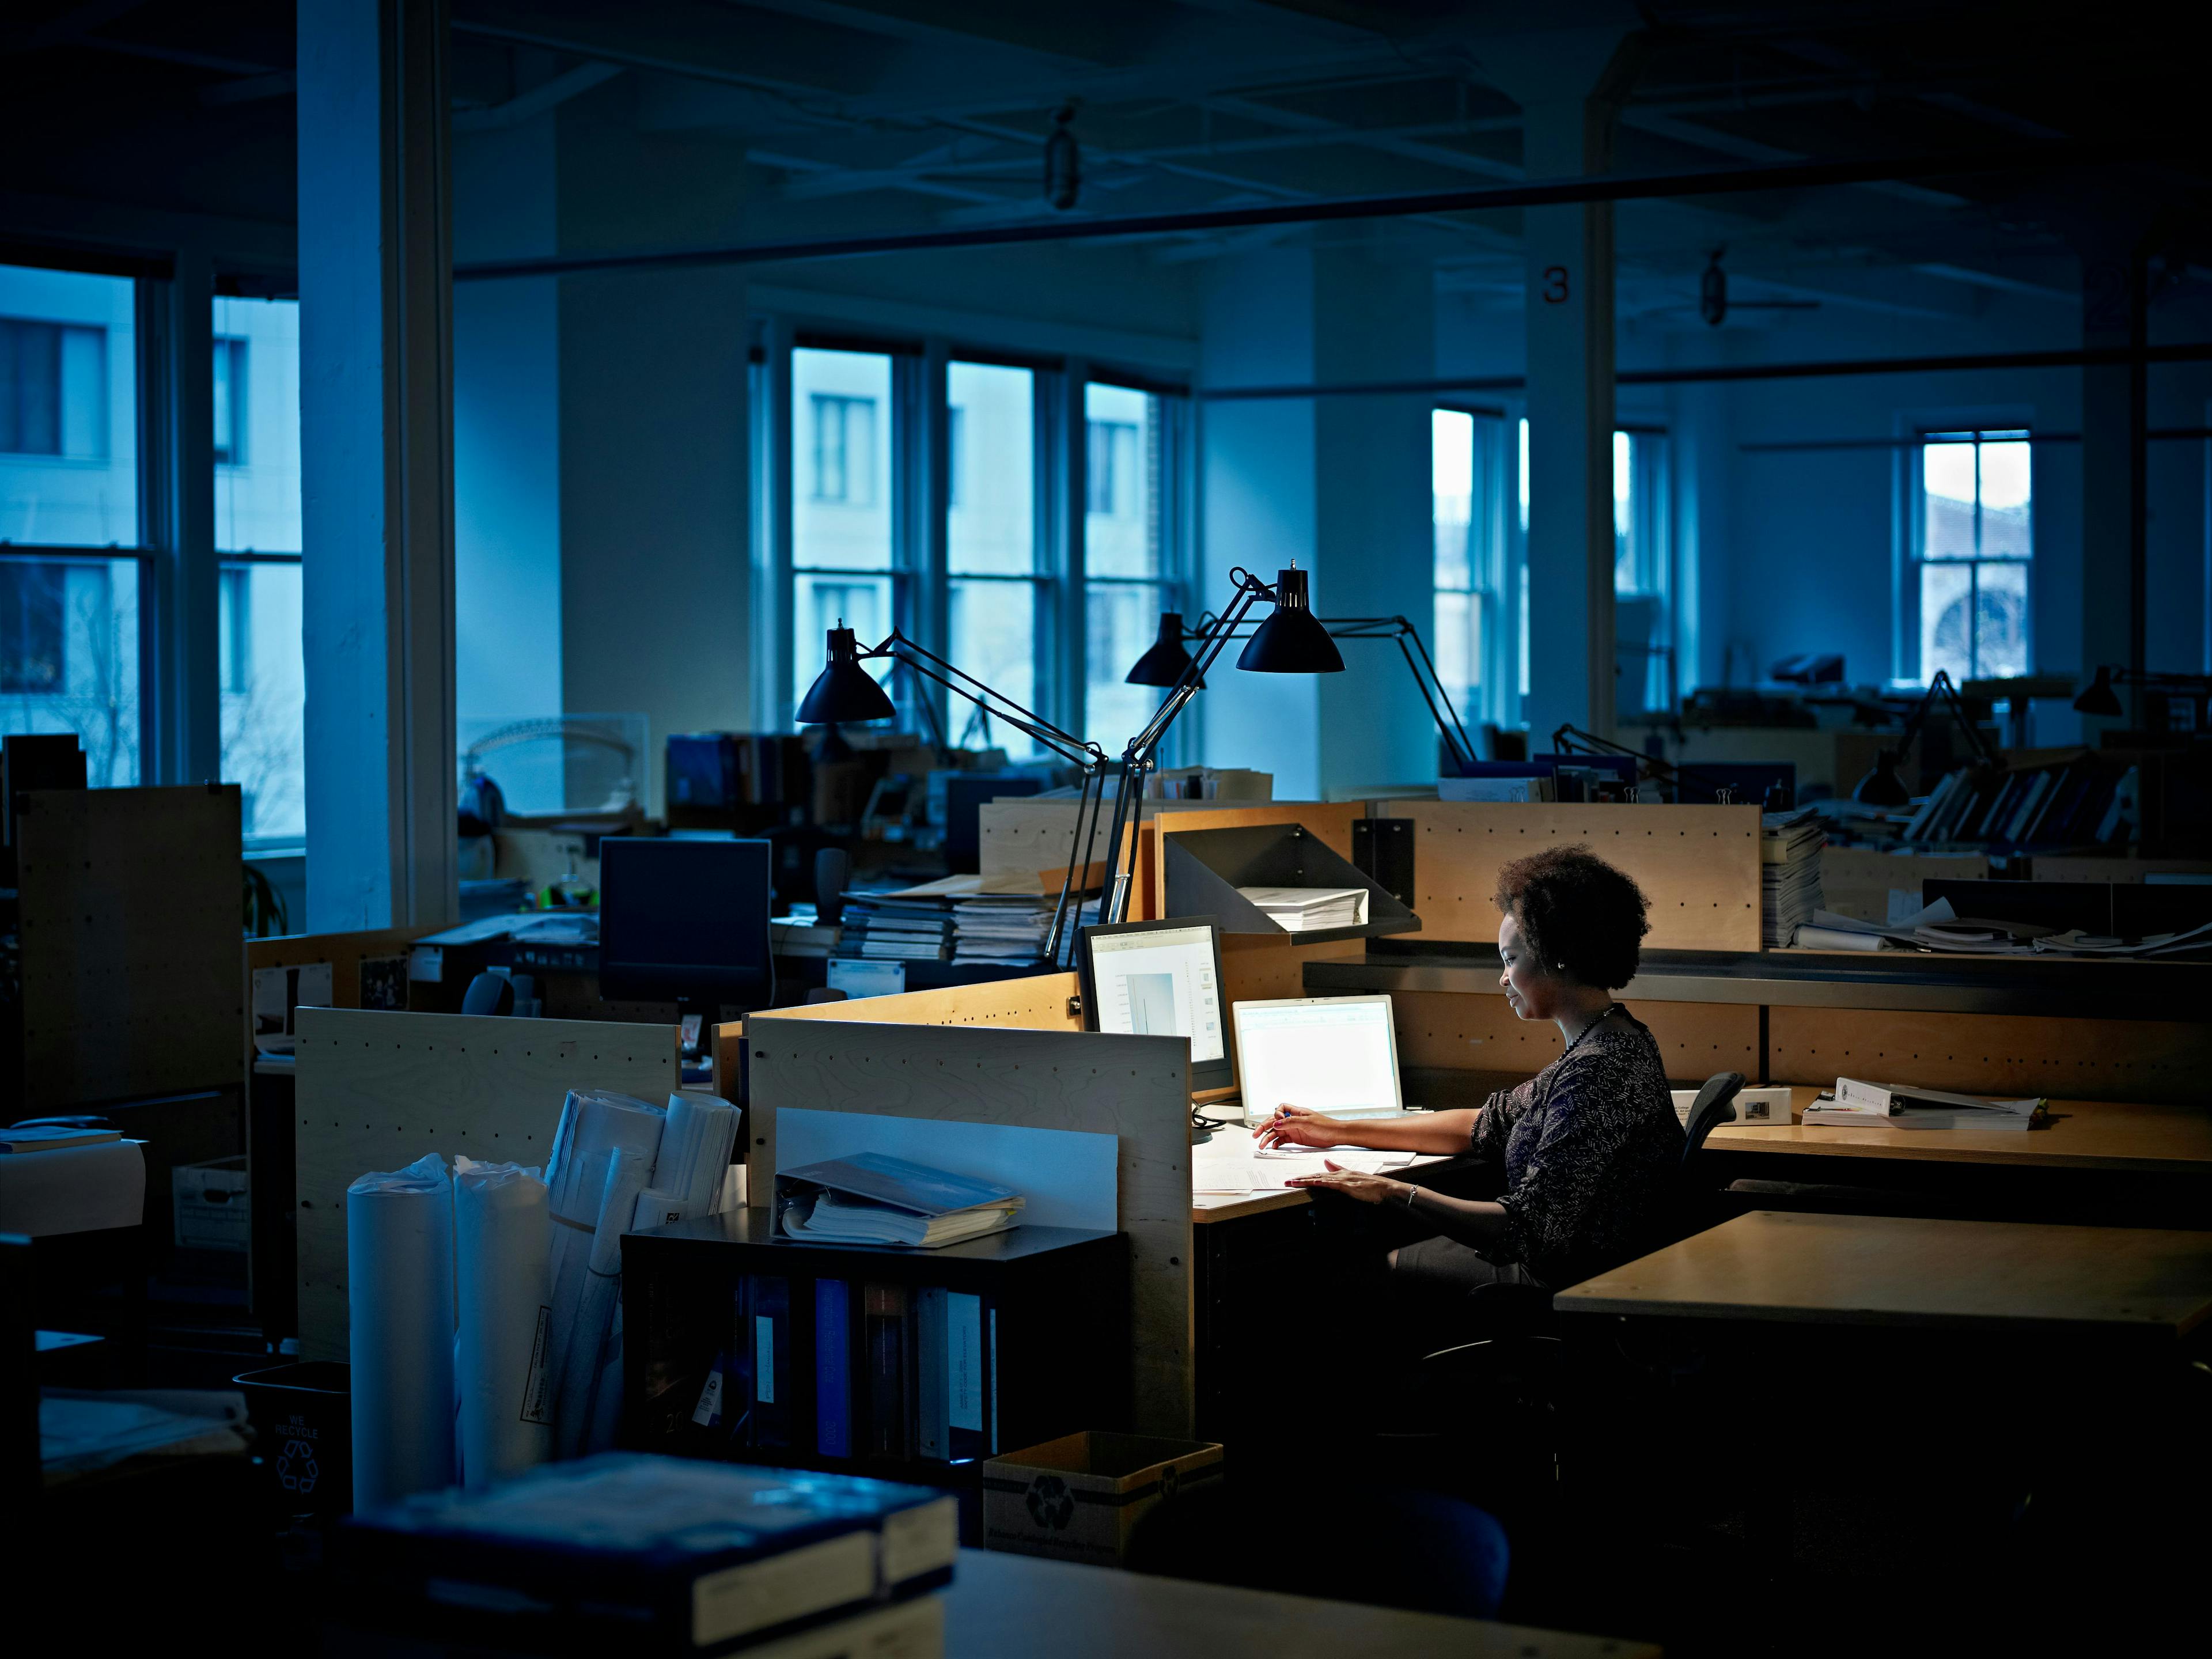 A person sits alone at a desk in a deserted, dimly-lit office.